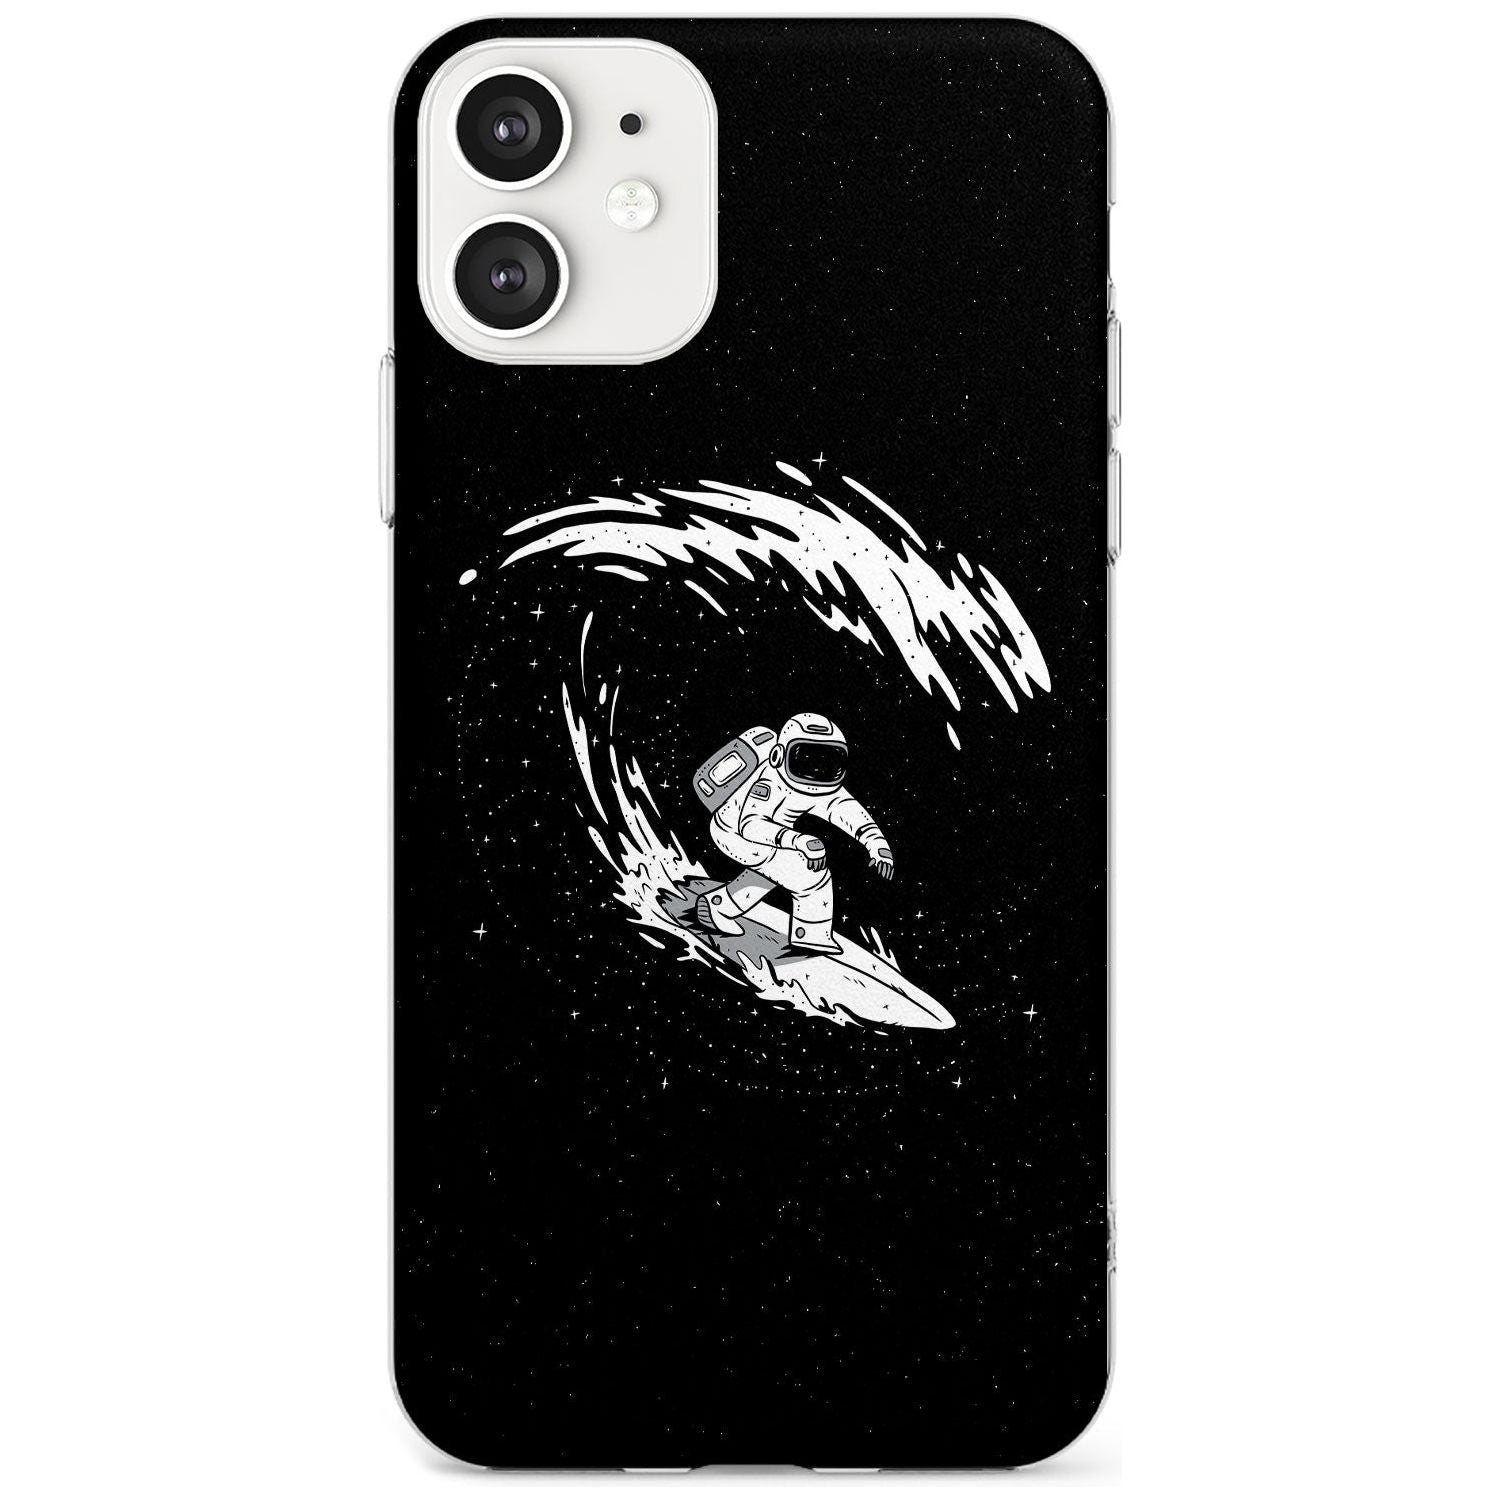 Surfing Astronaut Black Impact Phone Case for iPhone 11